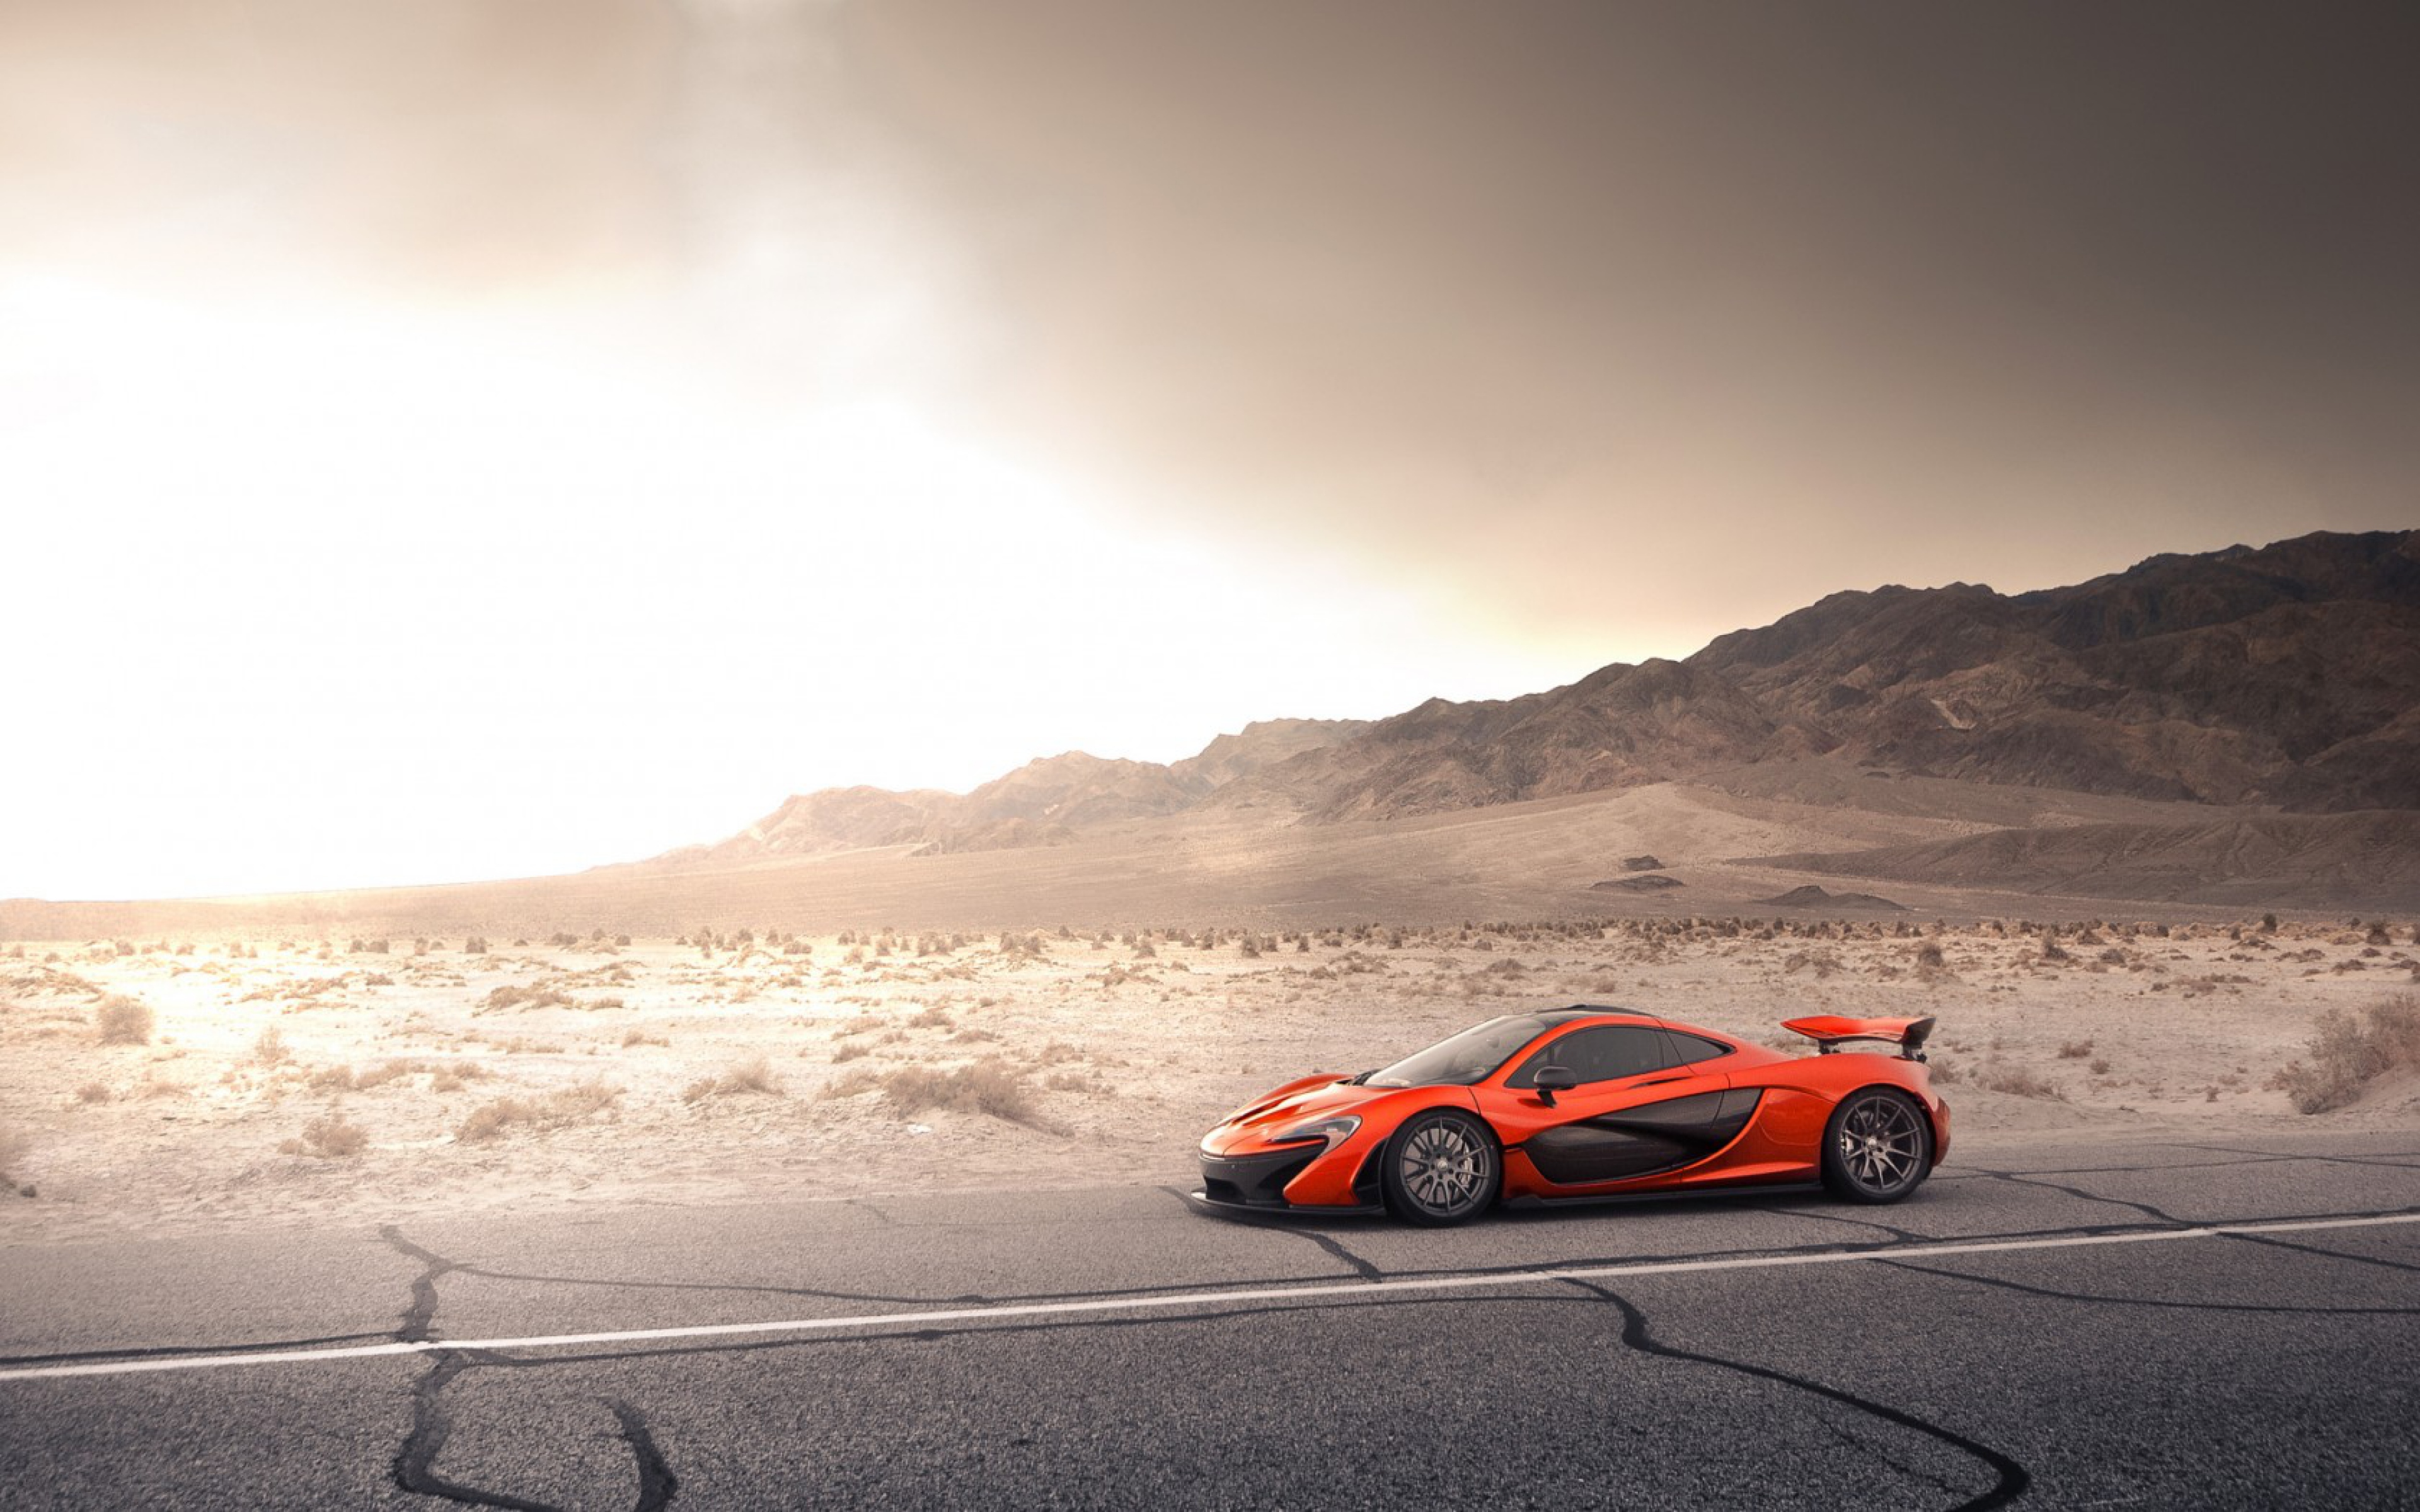 Mclaren P1 Side View, HD Cars, 4k Wallpapers, Images ...